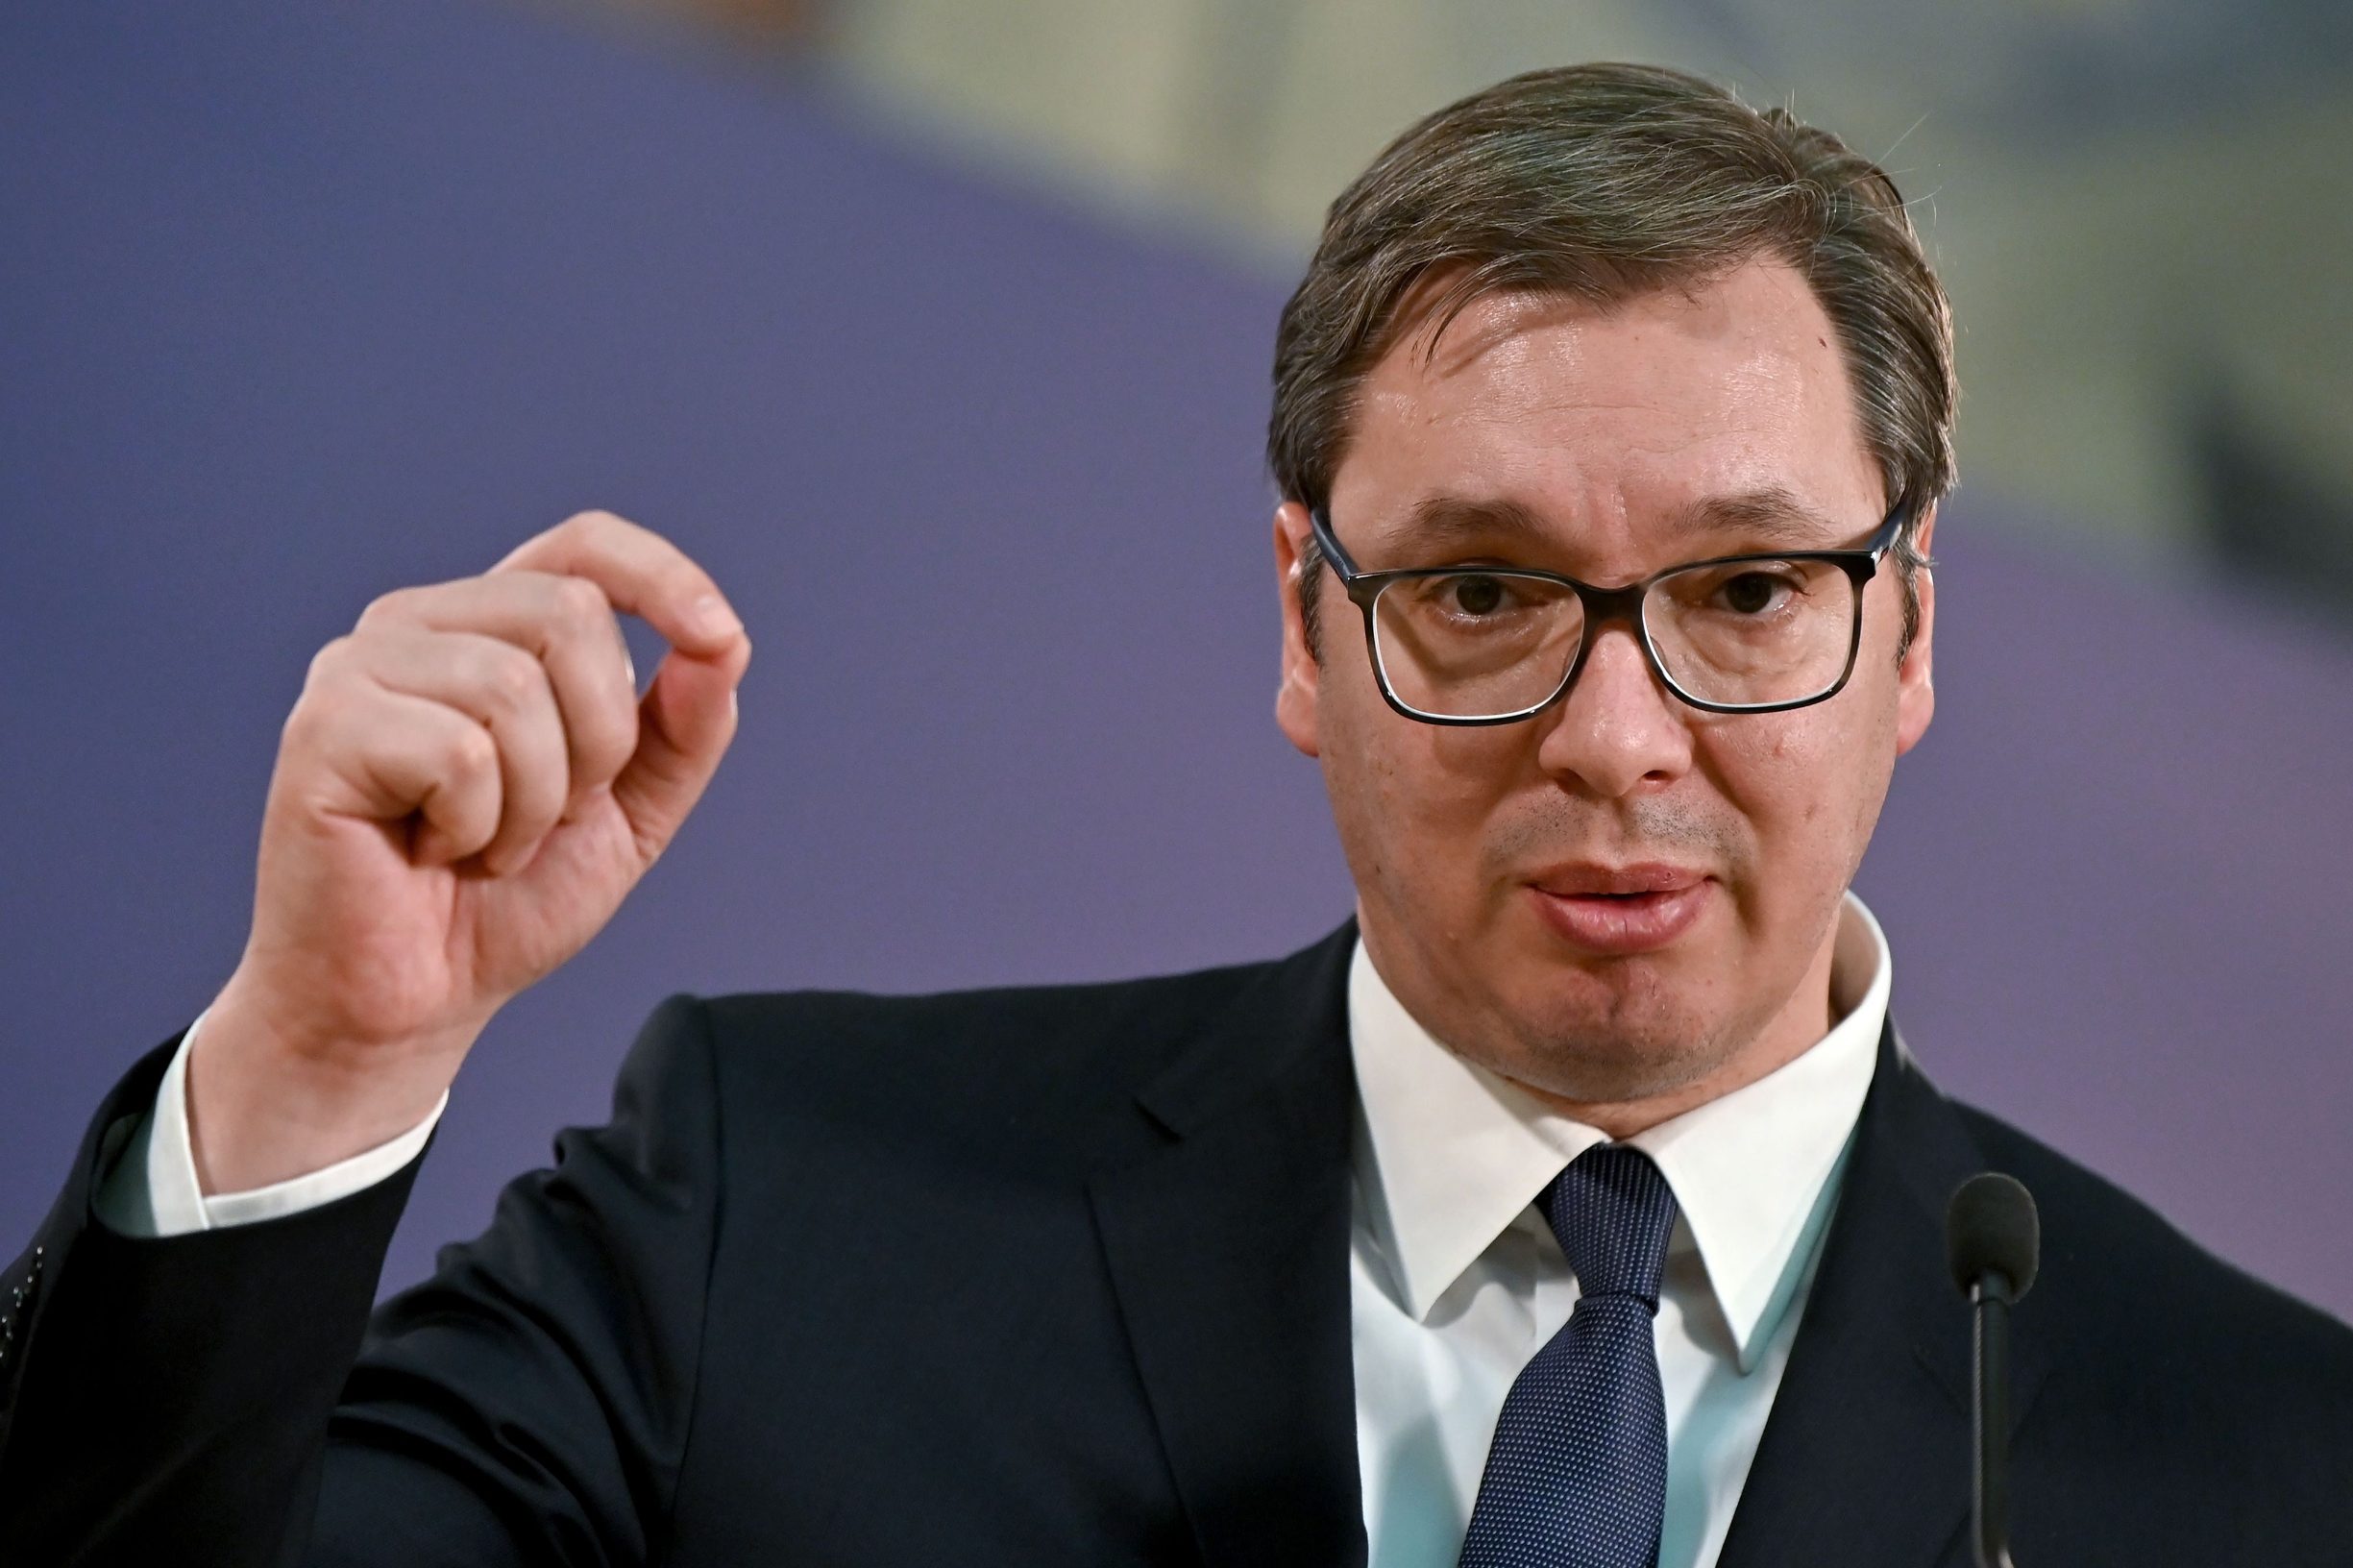 Serbian President Aleksandar Vucic holds a join press conference with the high representative of the European Union for Foreign Affairs and Security Policy  in Belgrade on January 31, 2020, during his  visit to Serbia. (Photo by Andrej ISAKOVIC / AFP)